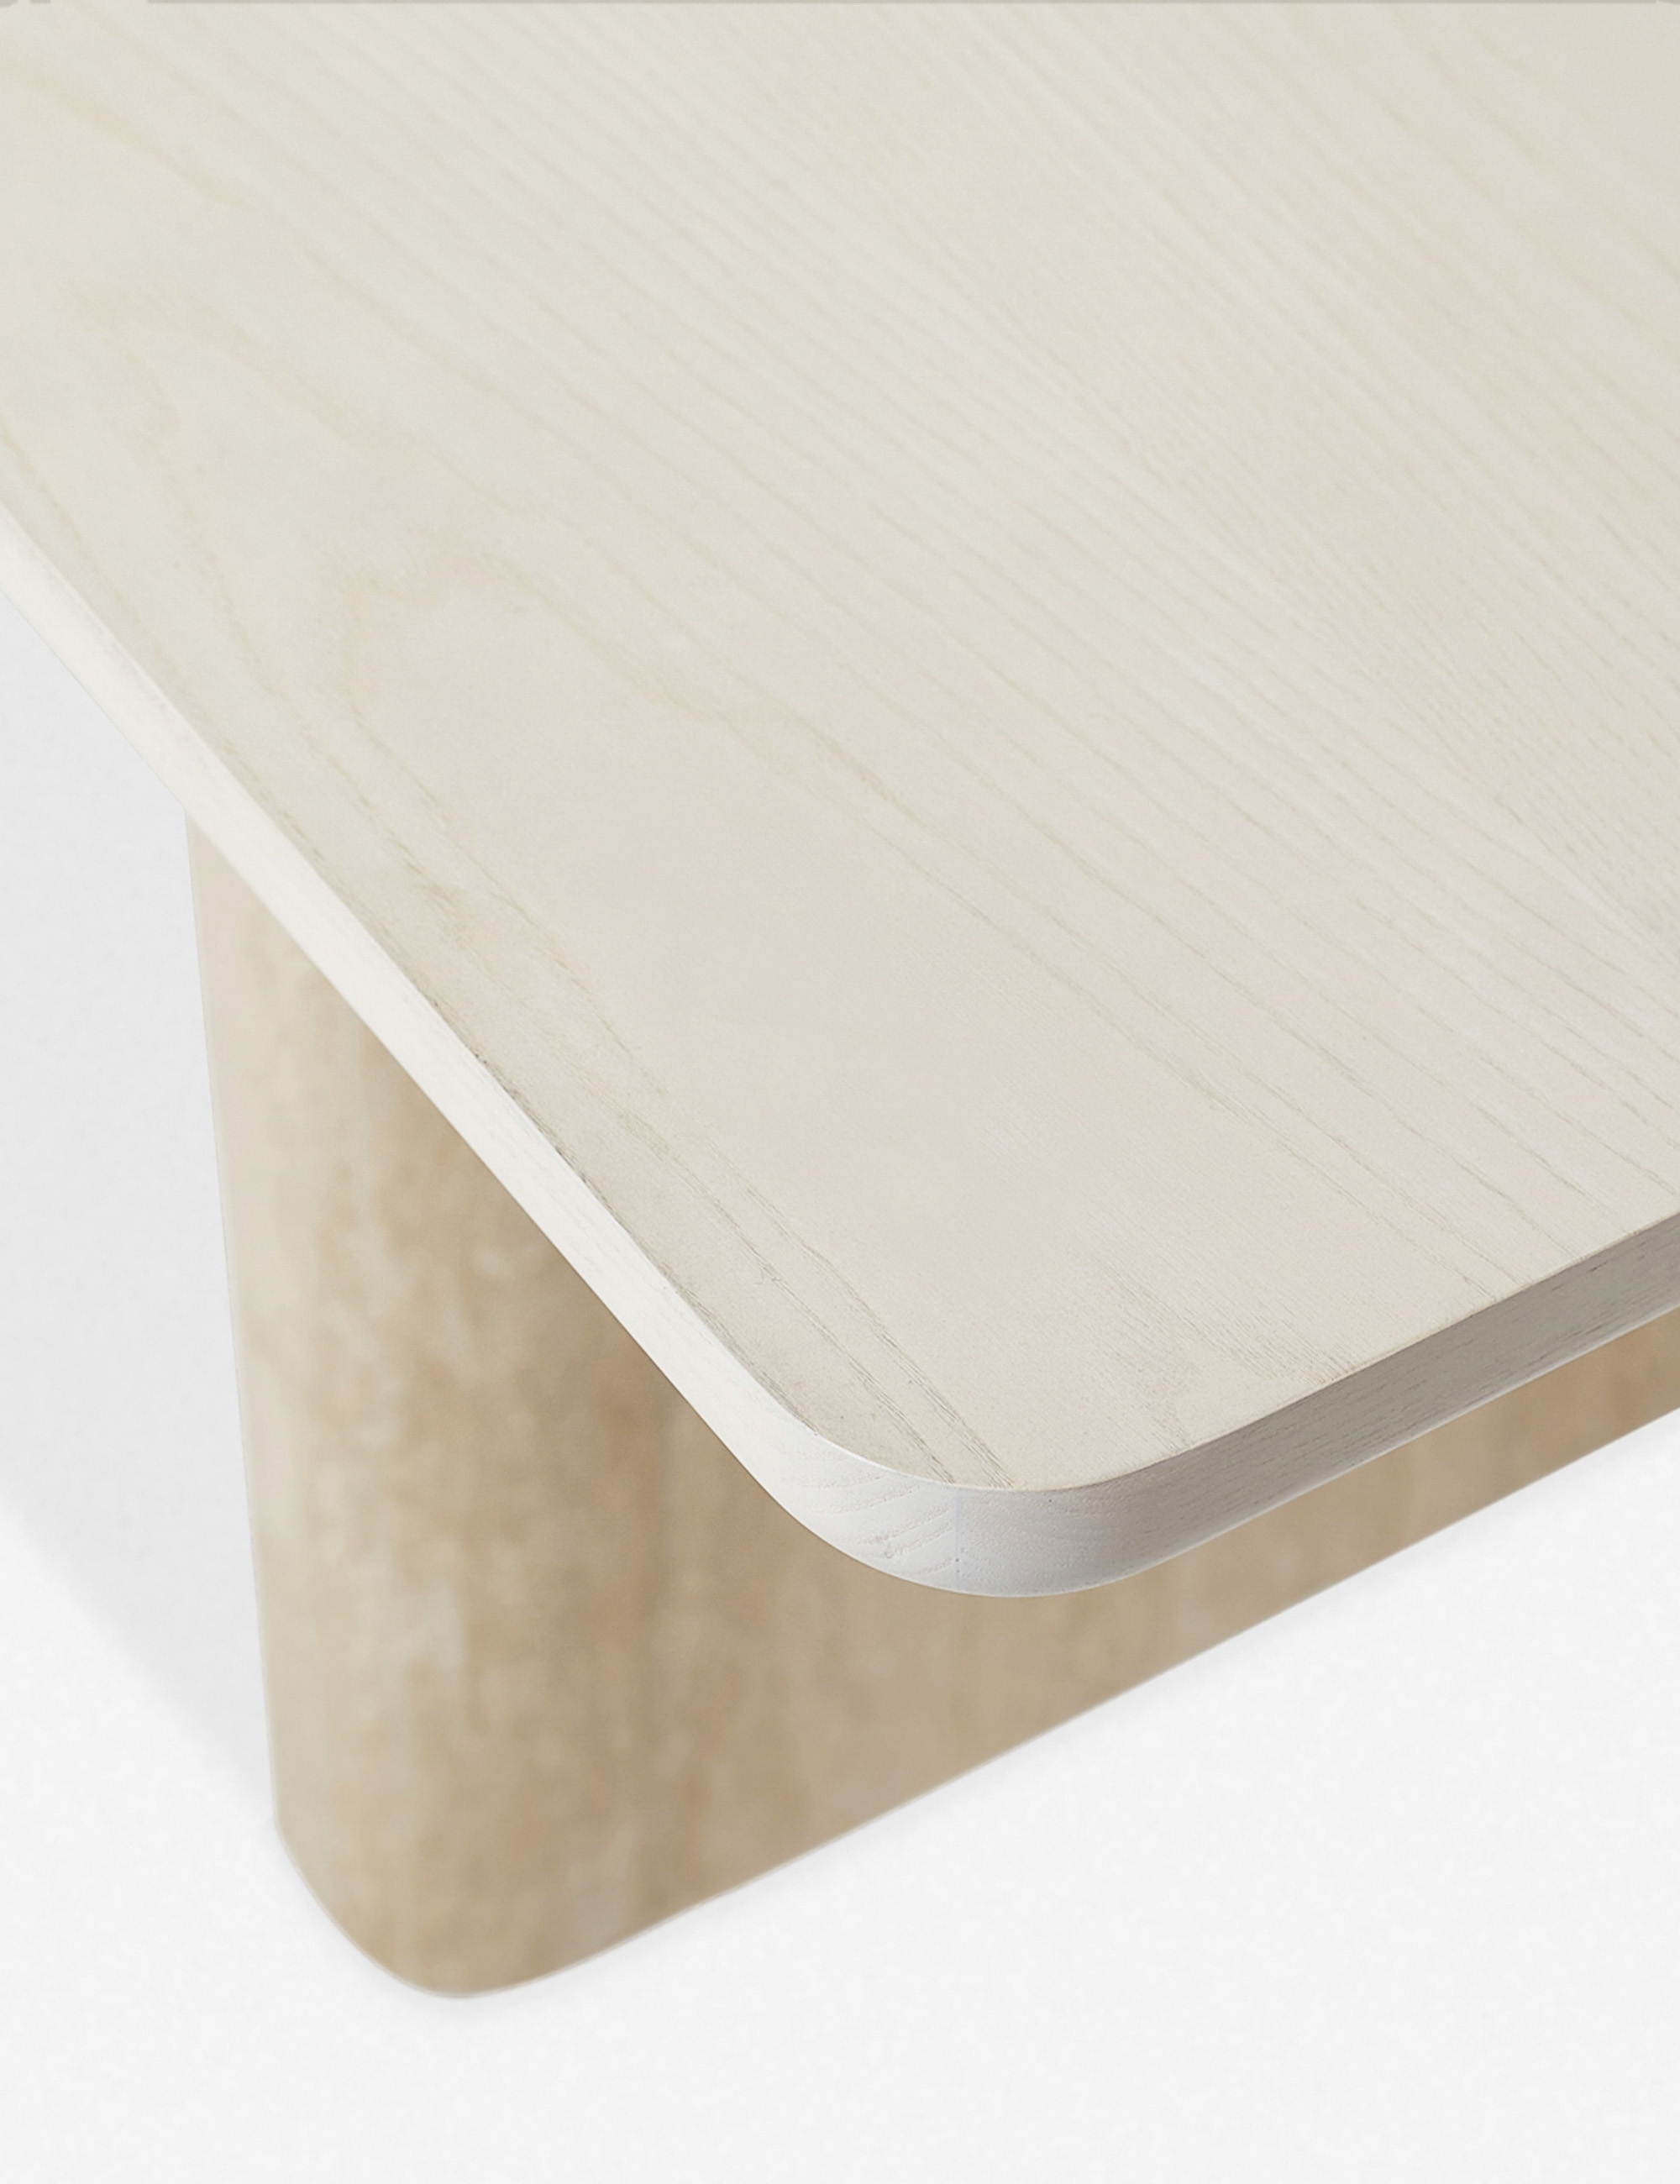 Embrey Dining Table - Image 4